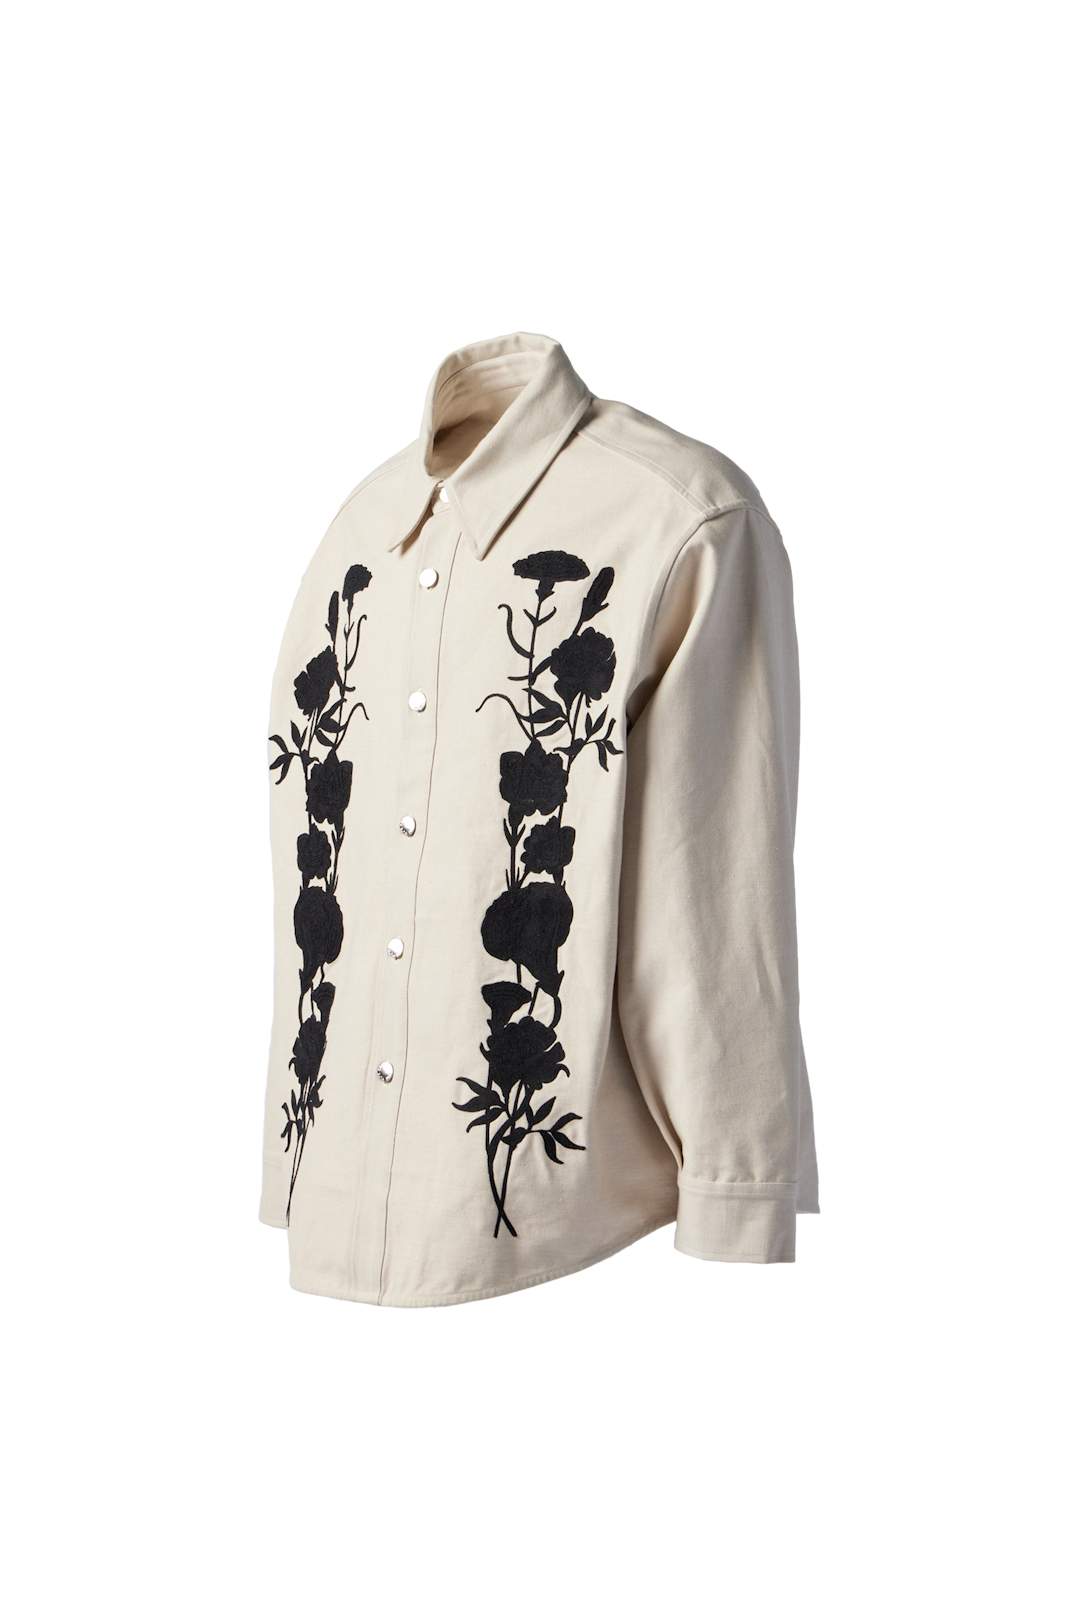 SONG FOR THE MUTE - Embroidered Foliage Jacket product image